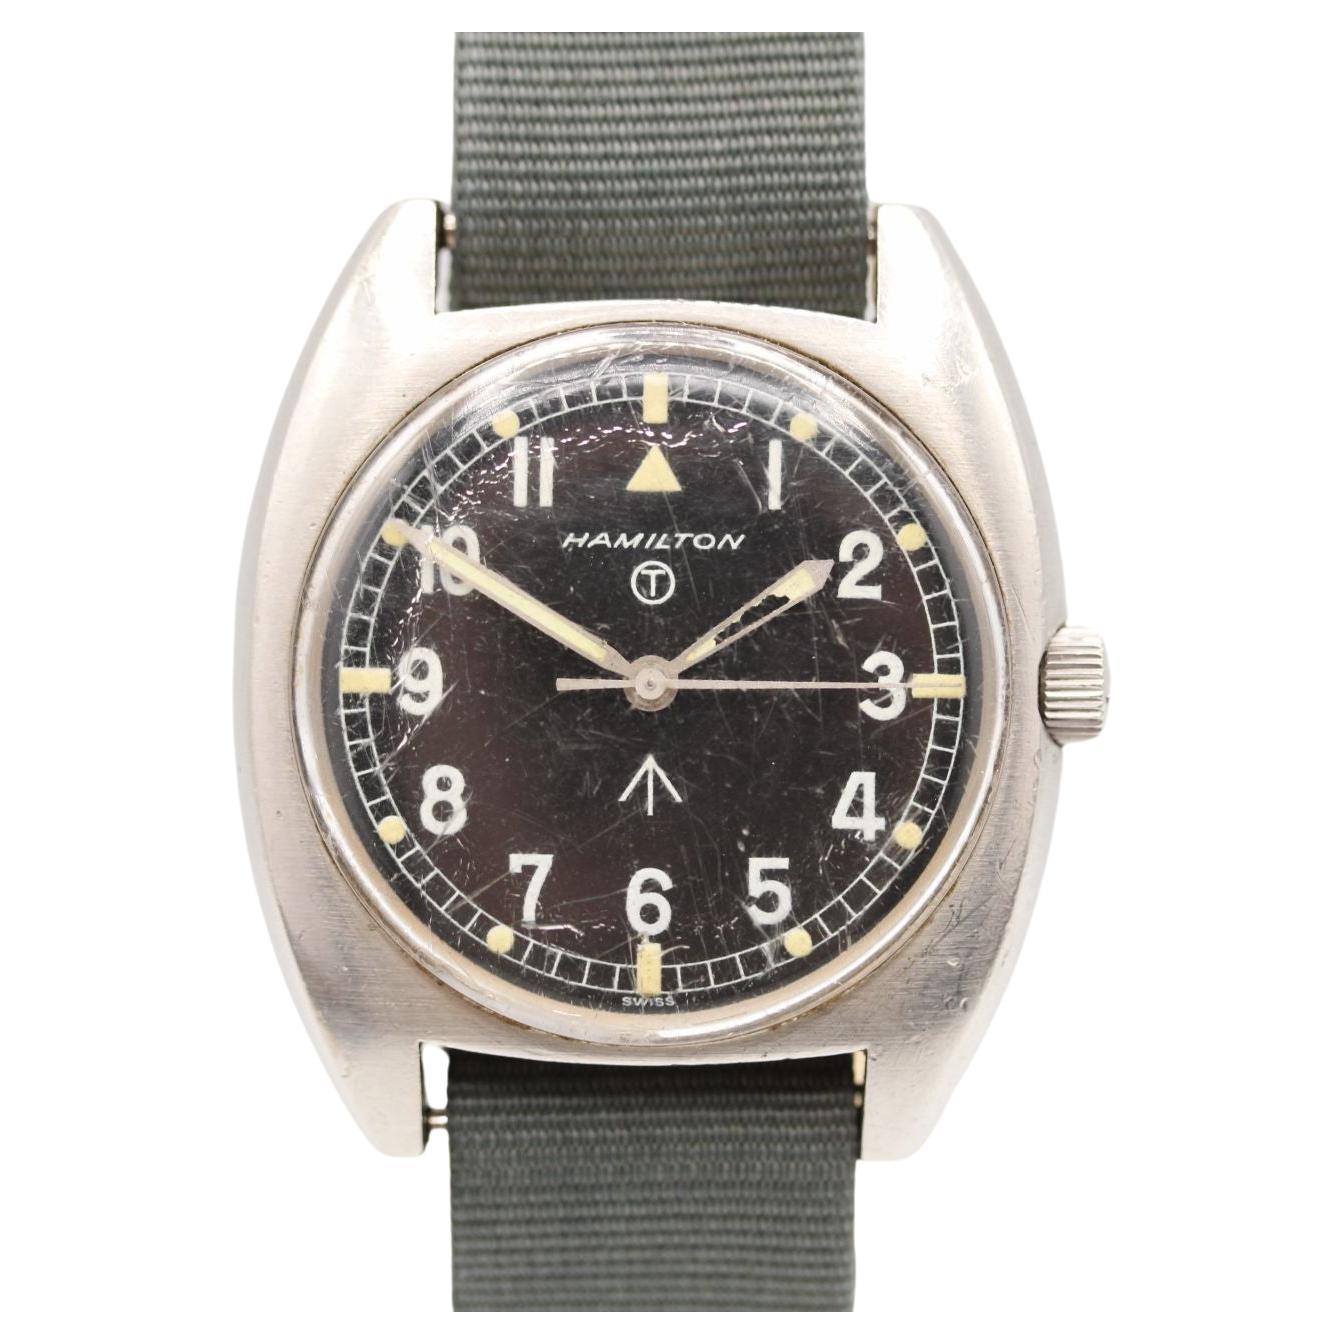 What makes a military watch a military watch?